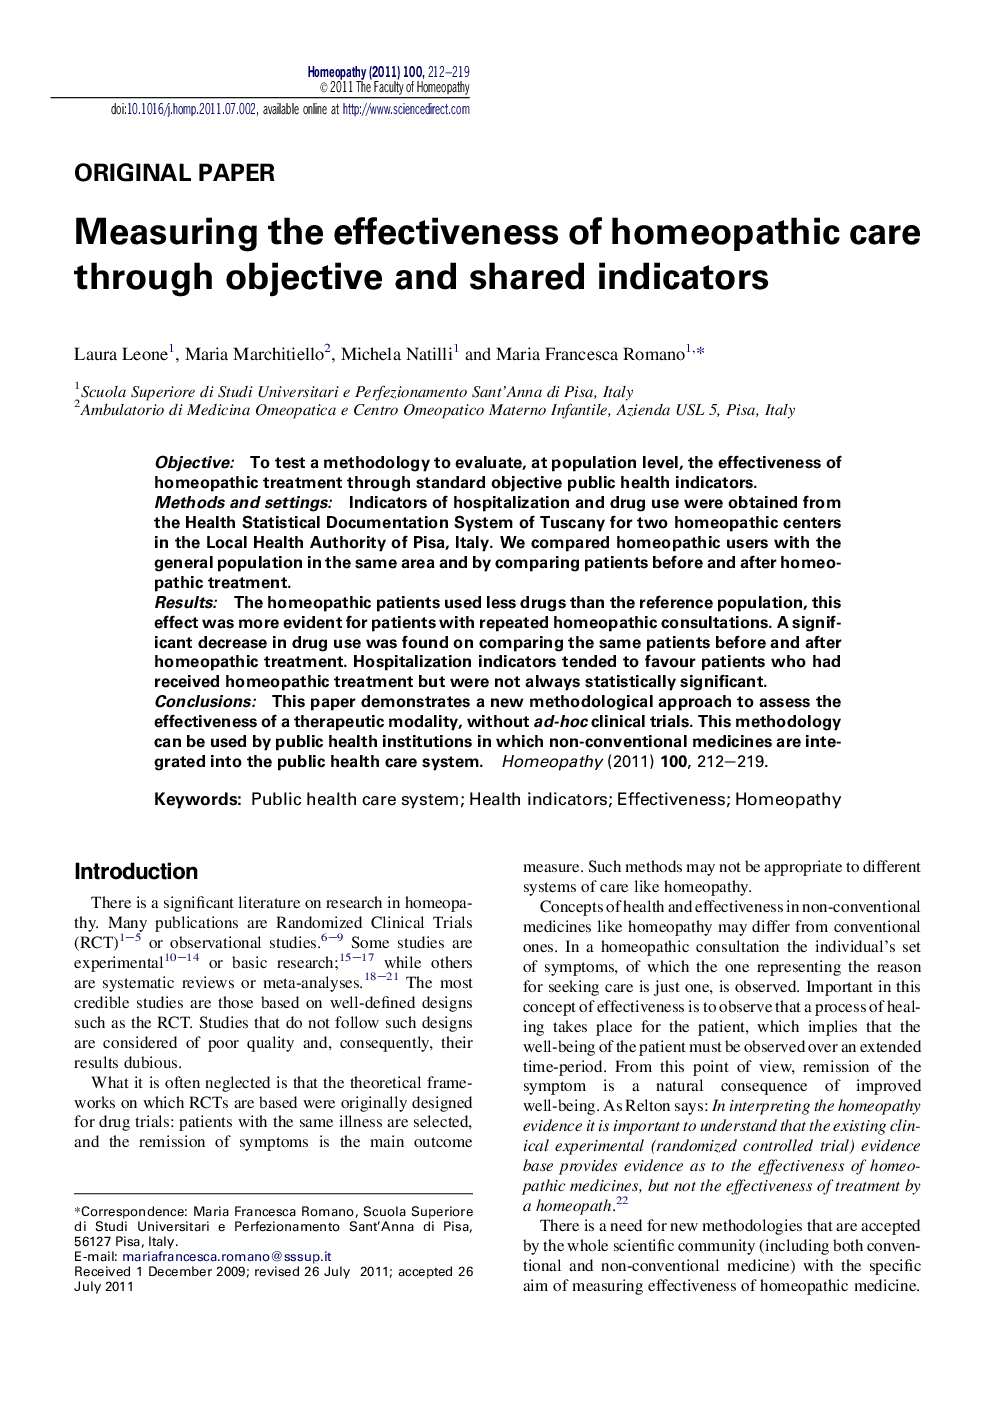 Measuring the effectiveness of homeopathic care through objective and shared indicators